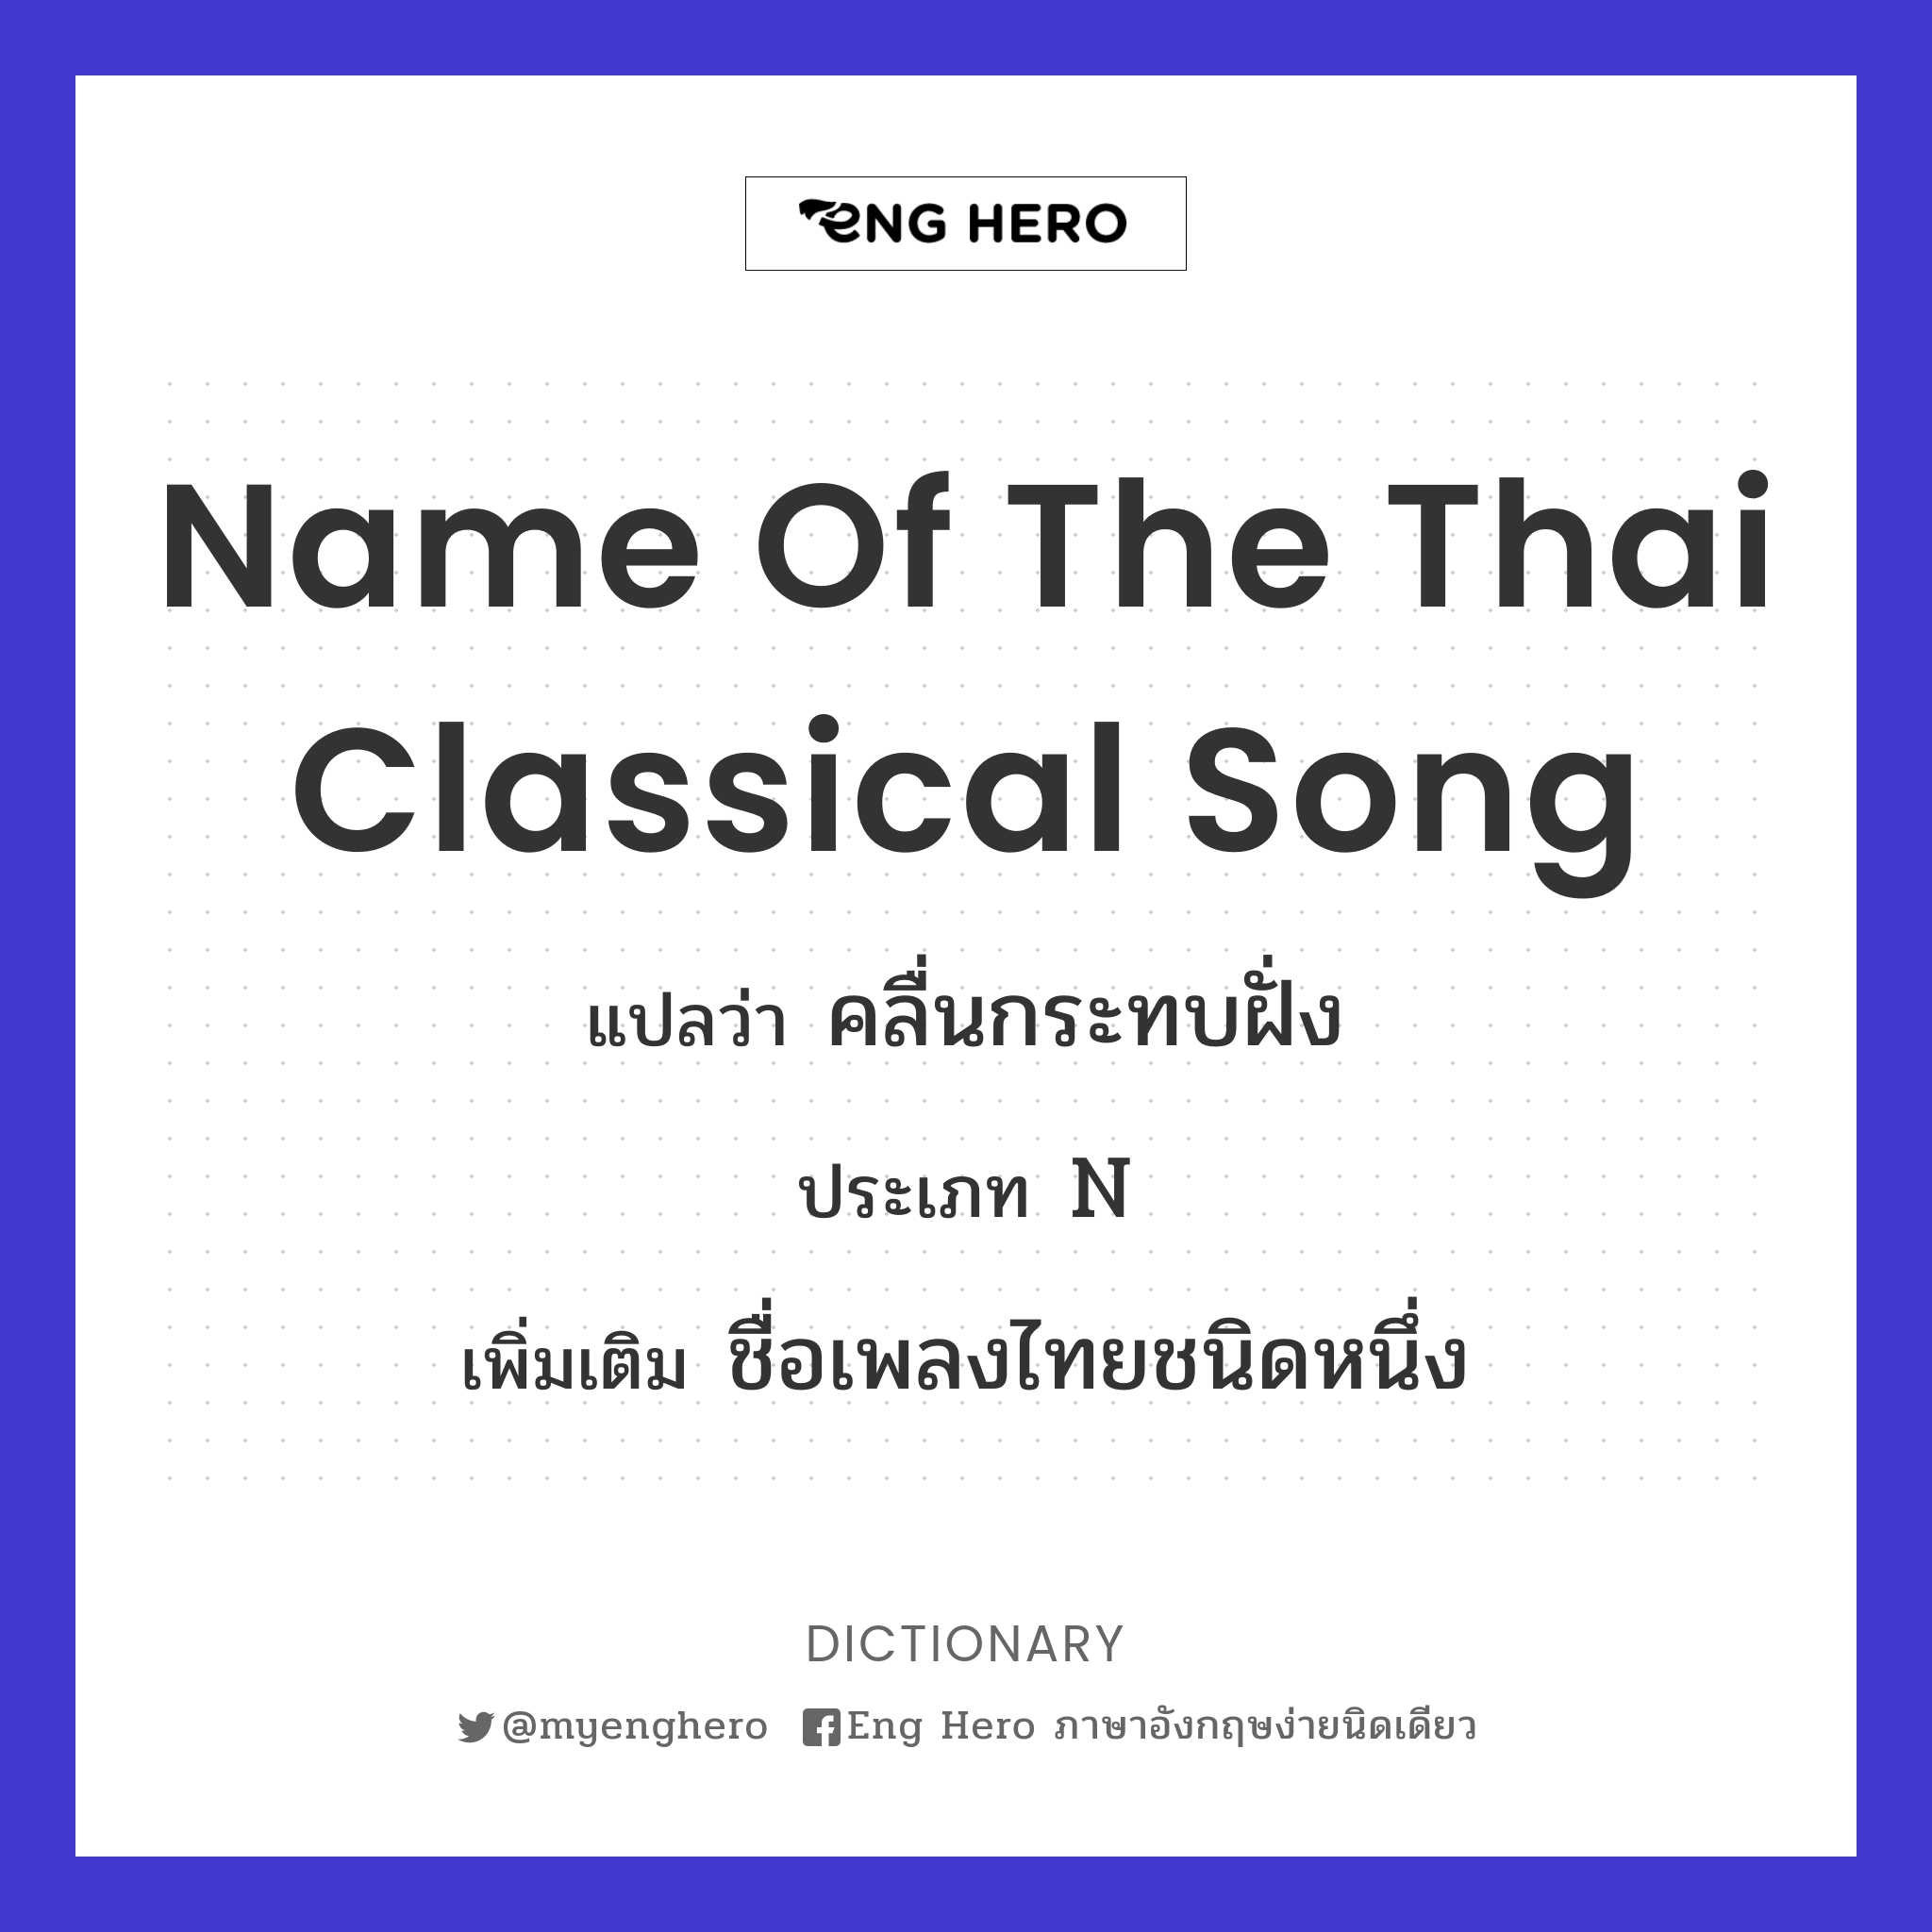 name of the Thai classical song